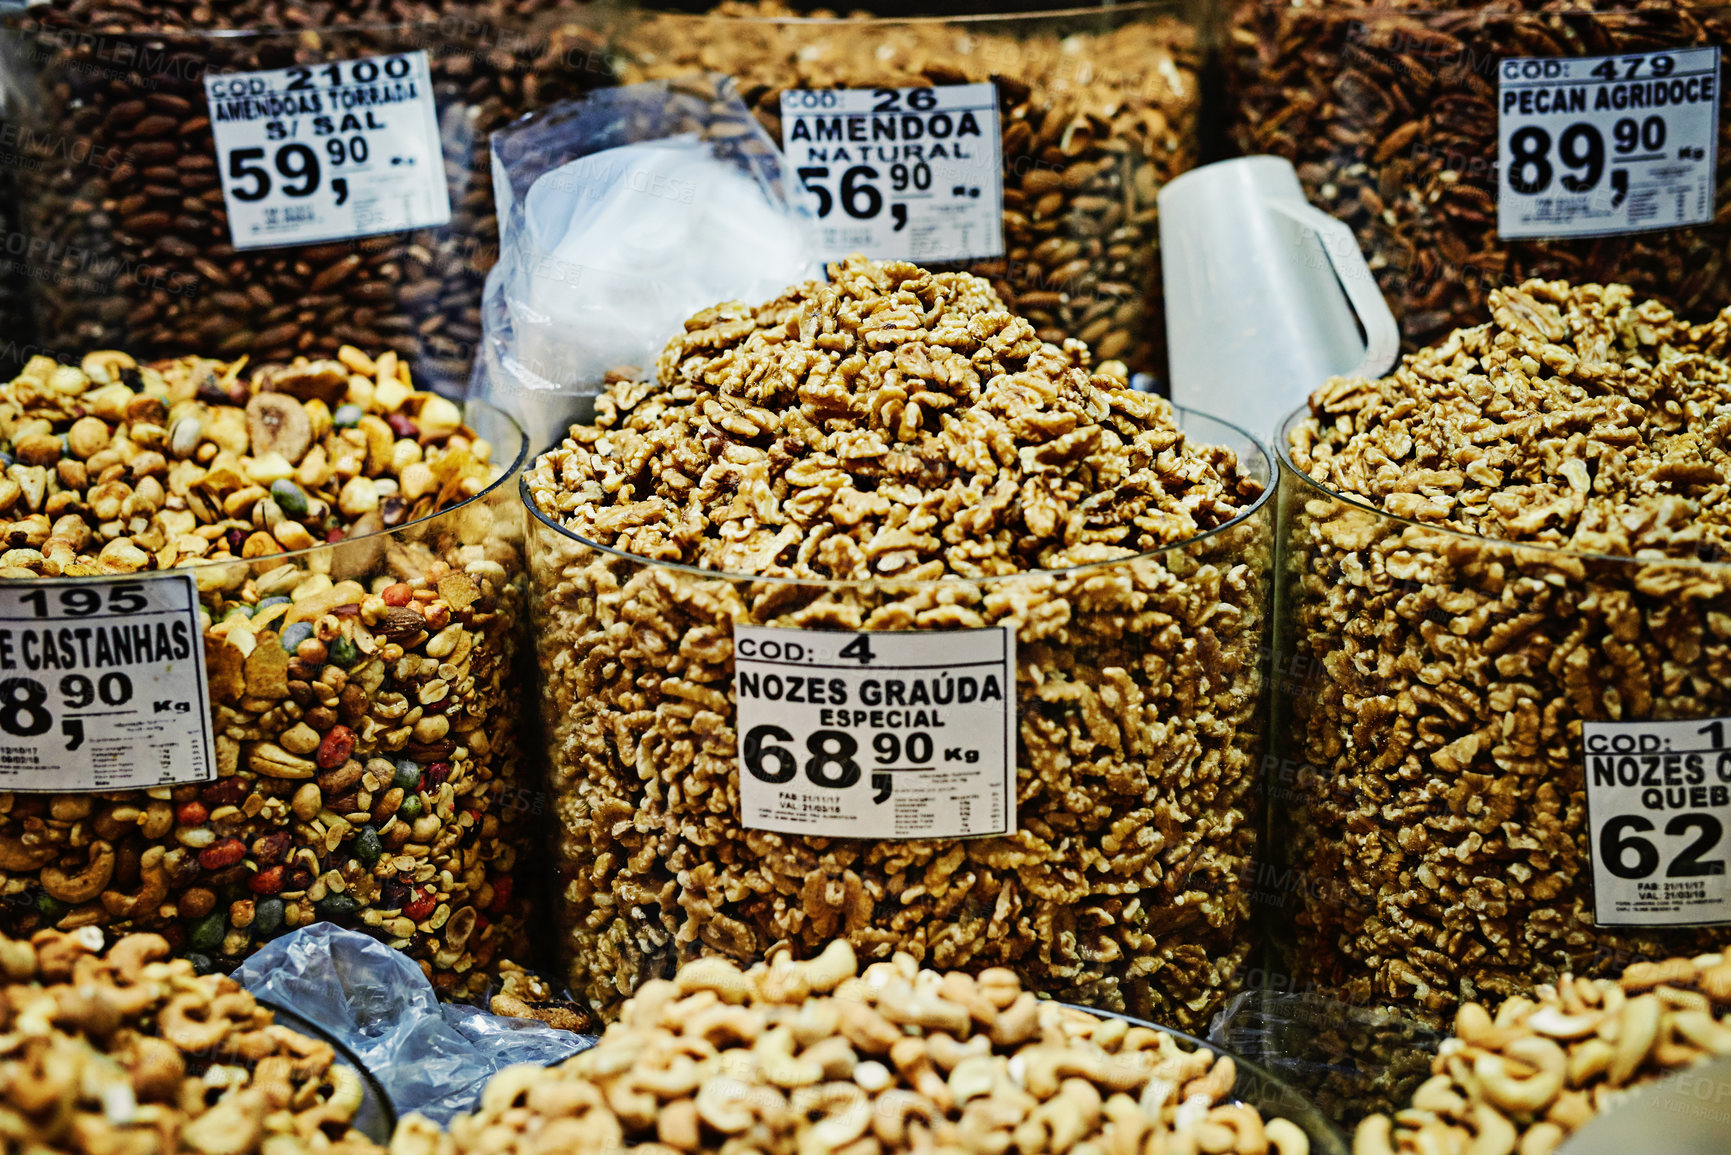 Buy stock photo Shot of containers filled with different types of nuts and put on display to be sold at a market during the day